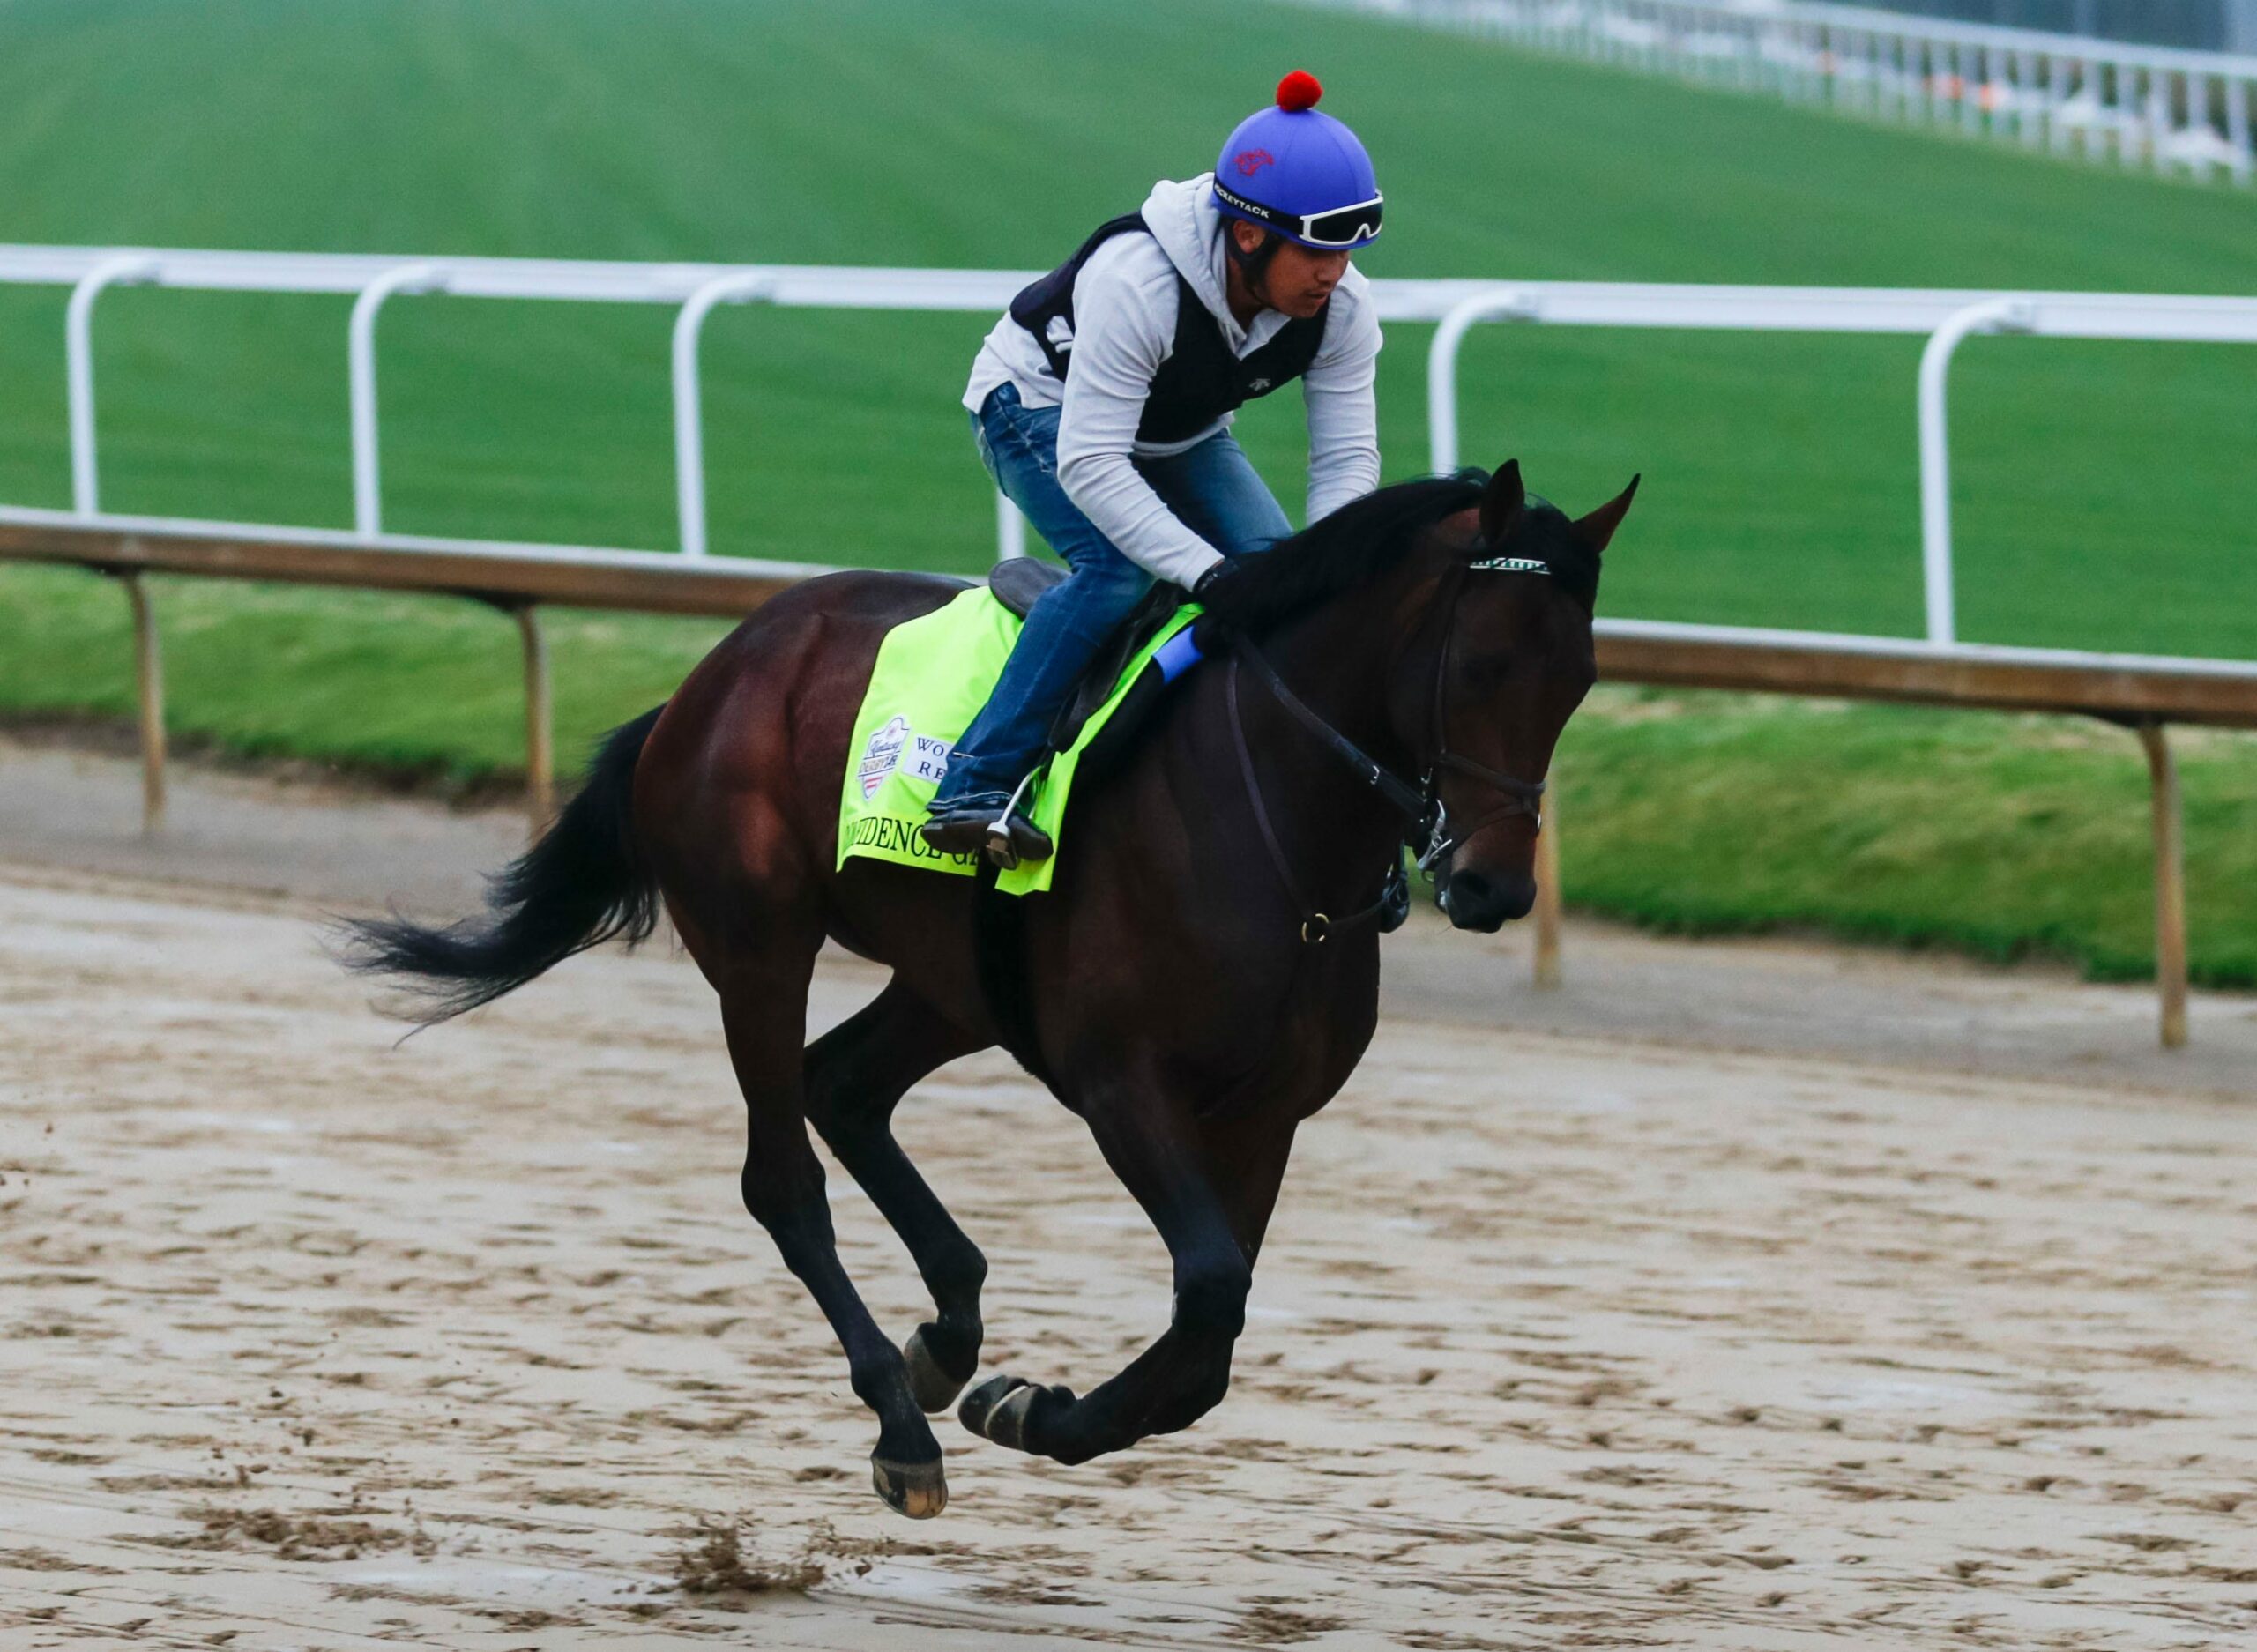 Breaking Down The Contenders: Who Is The Top Pick To Win The Kentucky Derby?